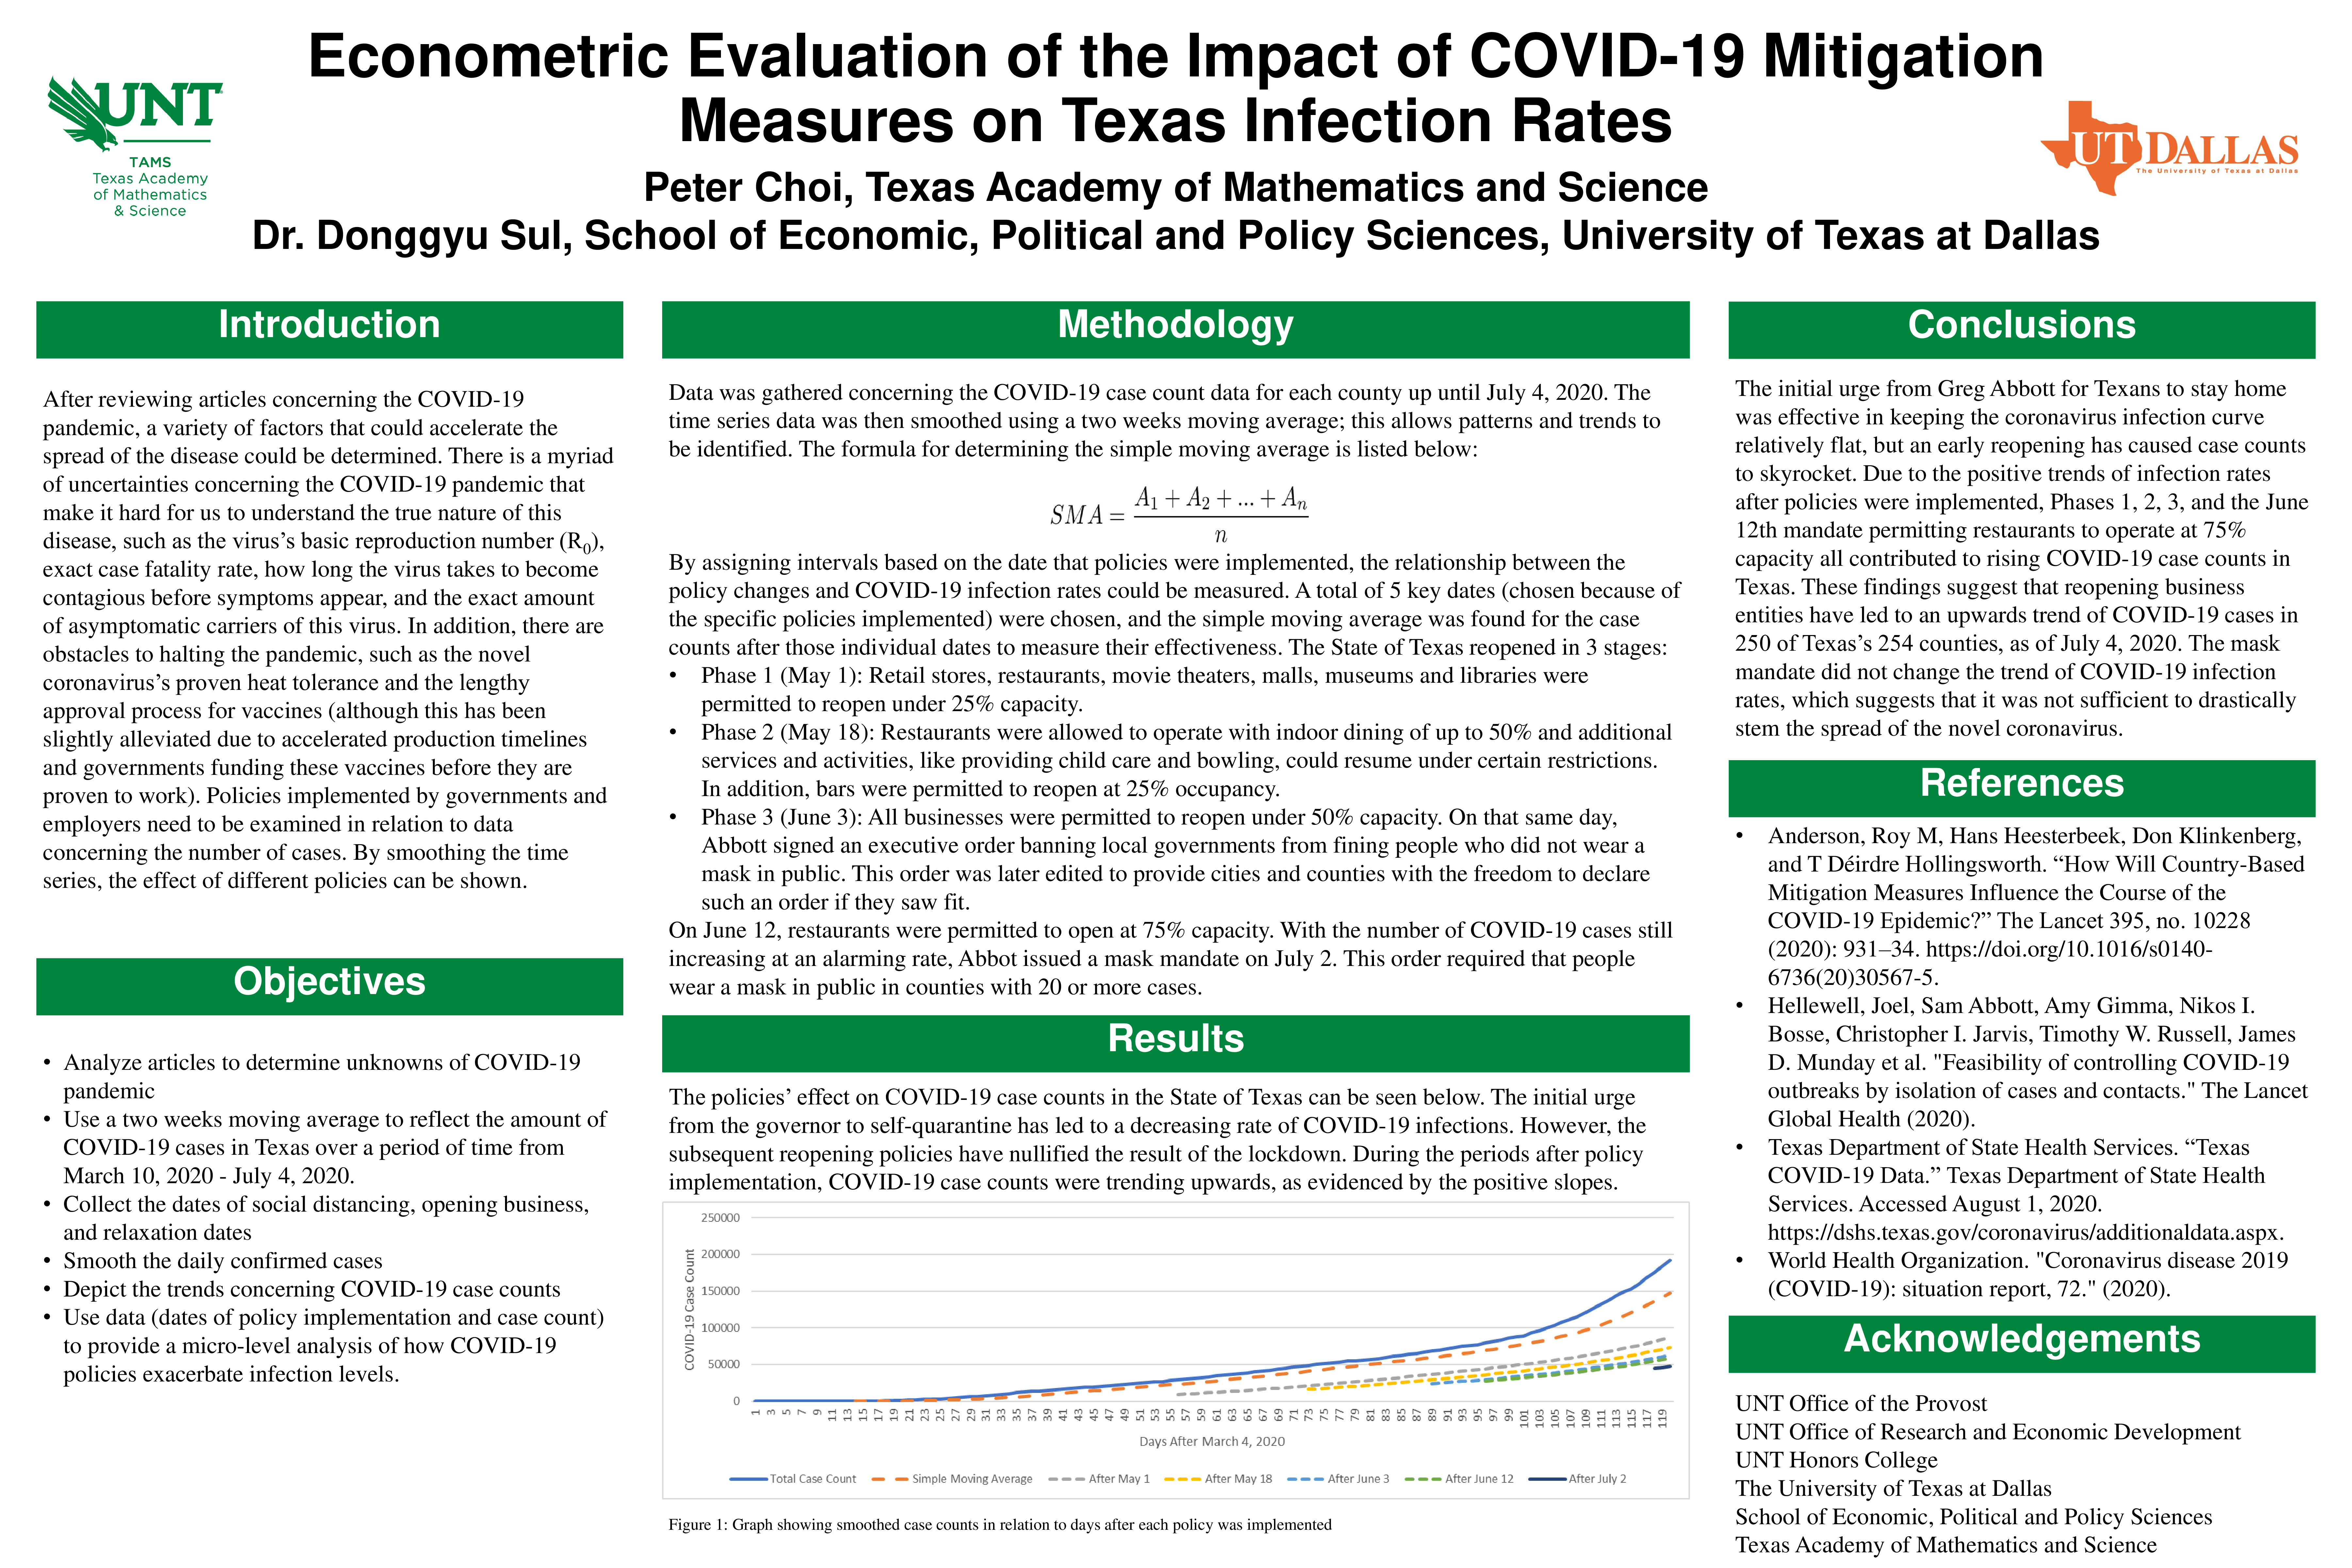 Econometric Evaluation of the Impact of COVID-19 Mitigation Measures on Texas Infection Rates